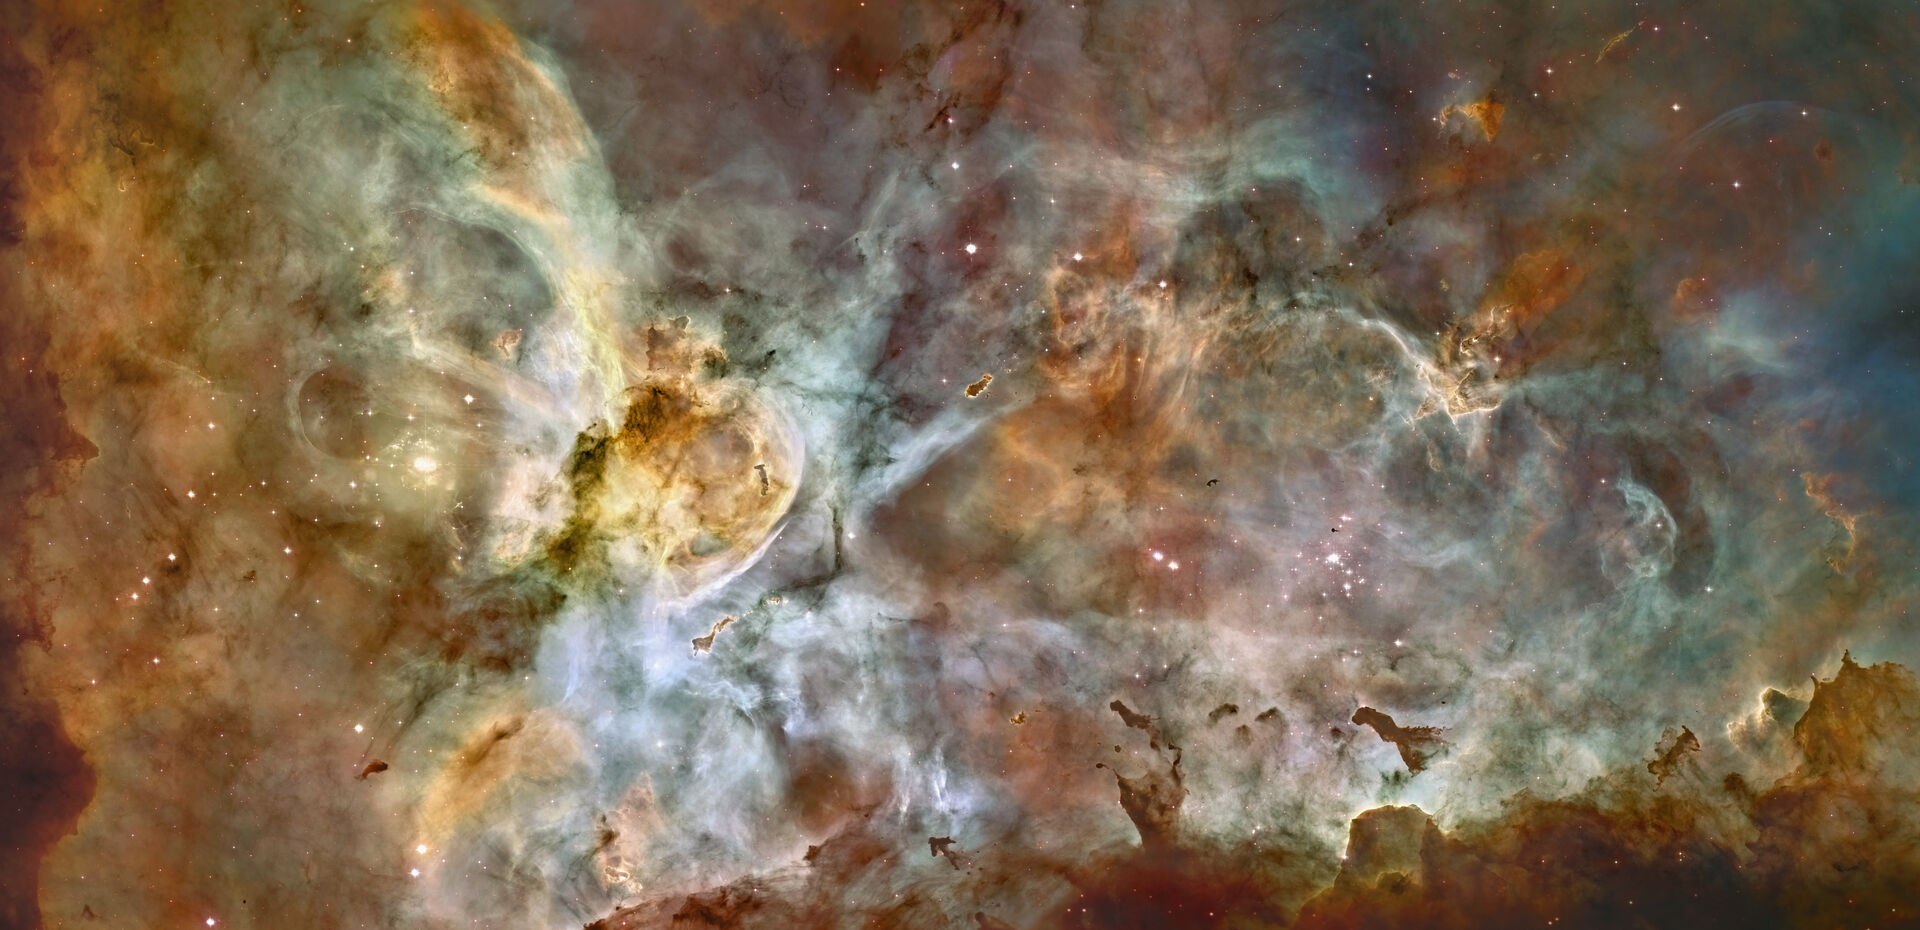 Hubble Space Telescope's image of the Carina Nebula, an intense star-forming region.